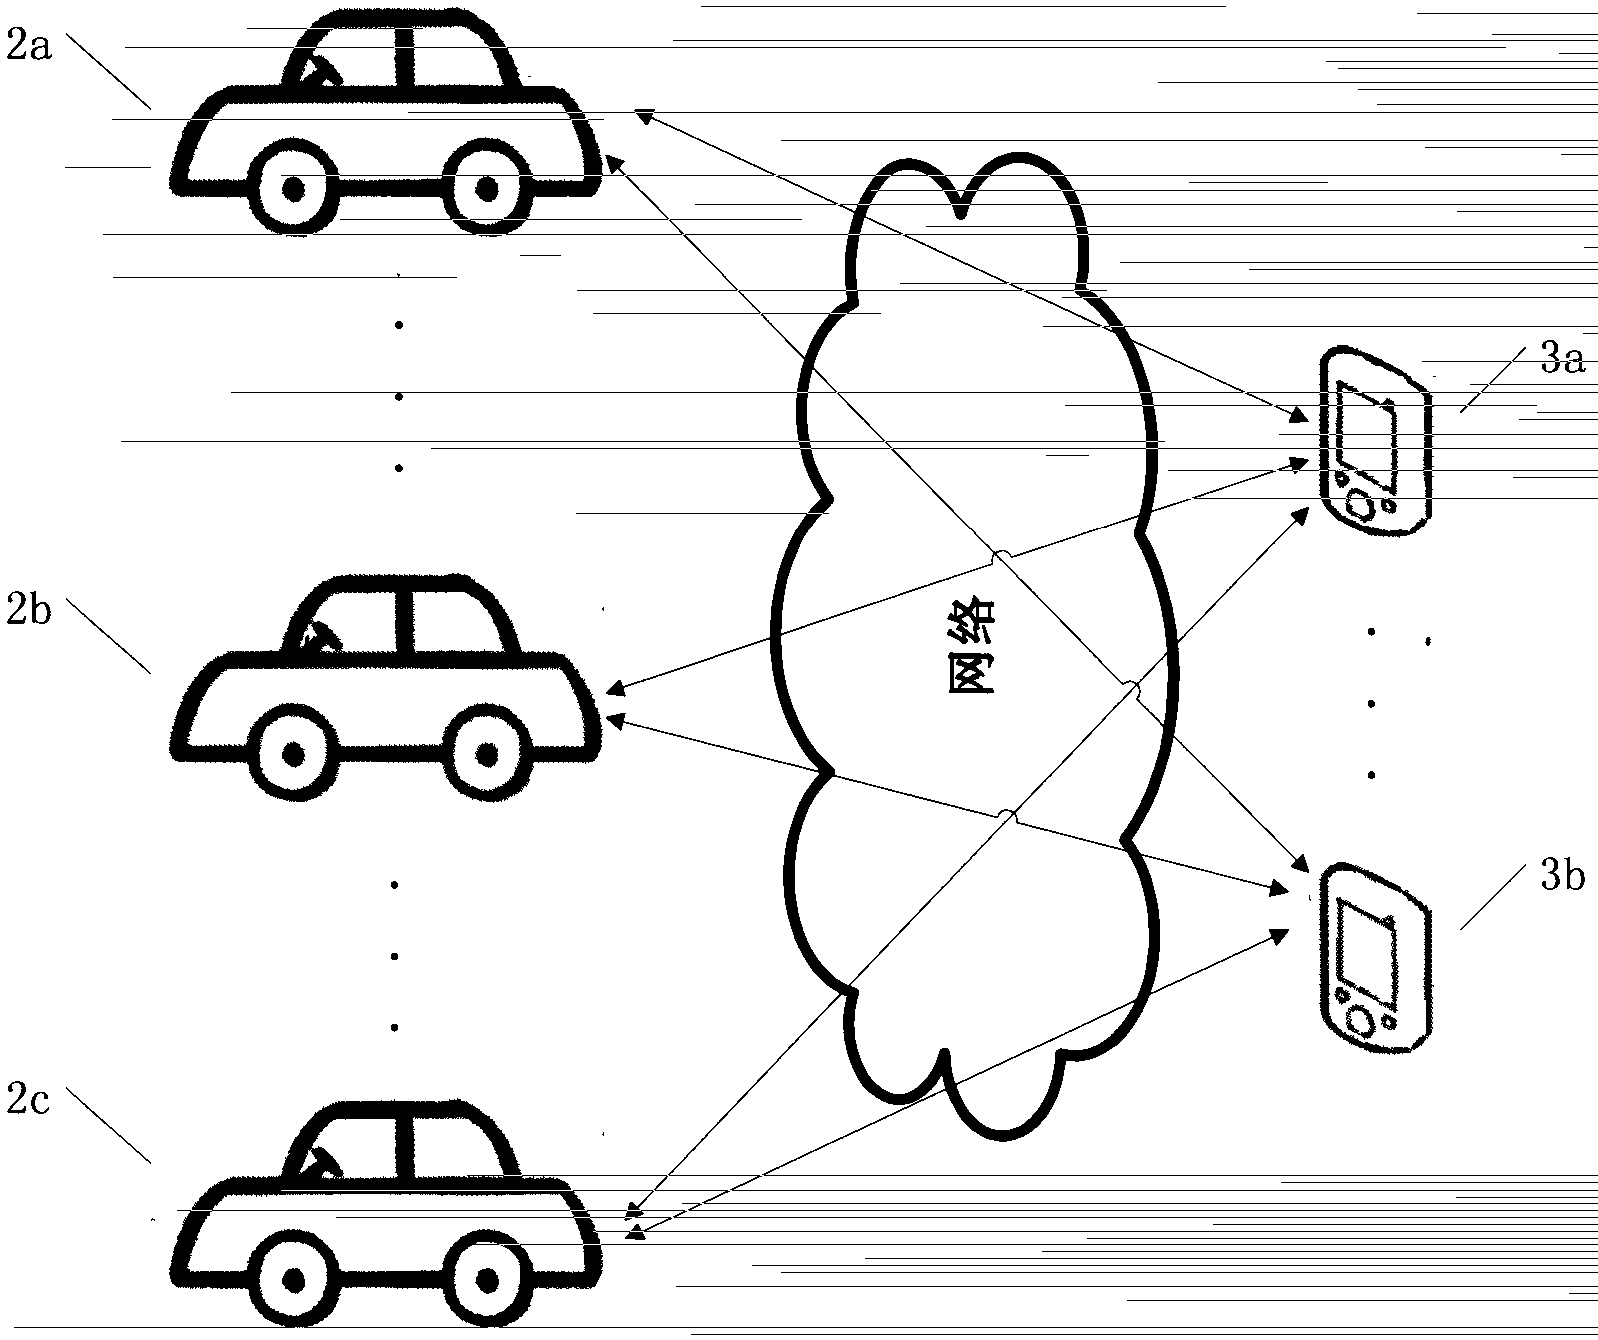 Positioning system based method for self-help taxi calling and logistics application